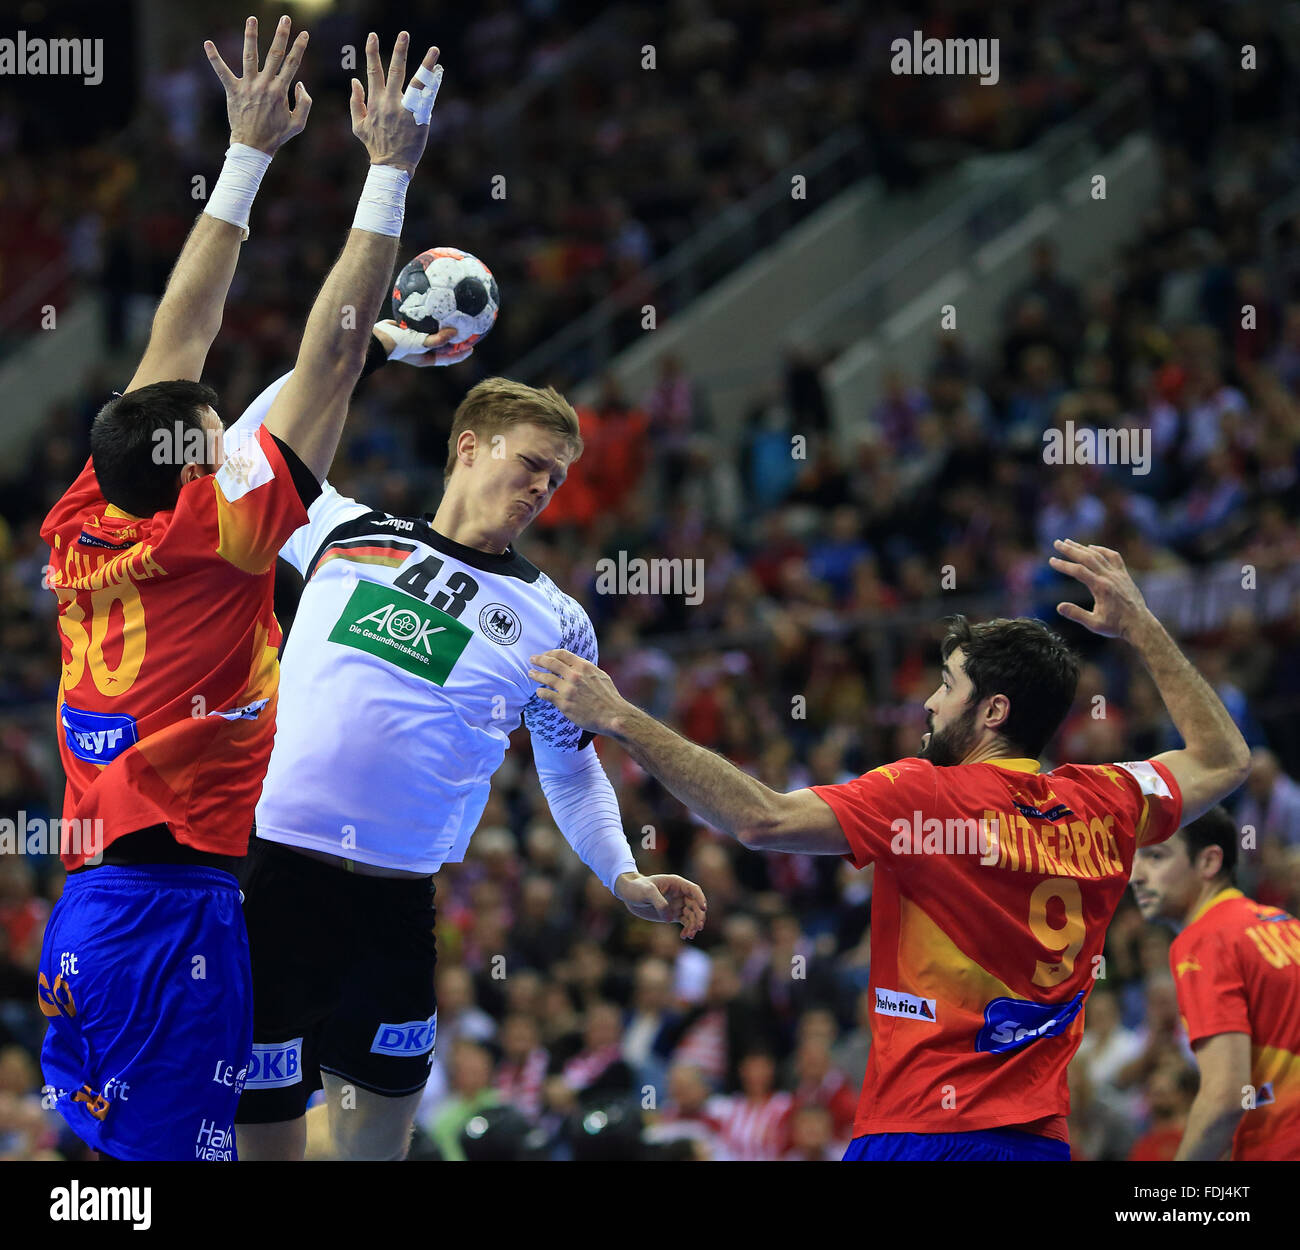 Krakow, Poland. 31st Jan, 2016. Germany's Niclas Pieczkowski (C) in action against Spain«s Gedeon Guardiola (L) an Raul Entrerrios during the 2016 EHF European Men's Handball Championship final between Germany and Spain at the Tauron Arena in Krakow, Poland, 31 January 2016. Germany defeated Spain by 24-17. Photo: Jens Wolf/dpa/Alamy Live News Stock Photo